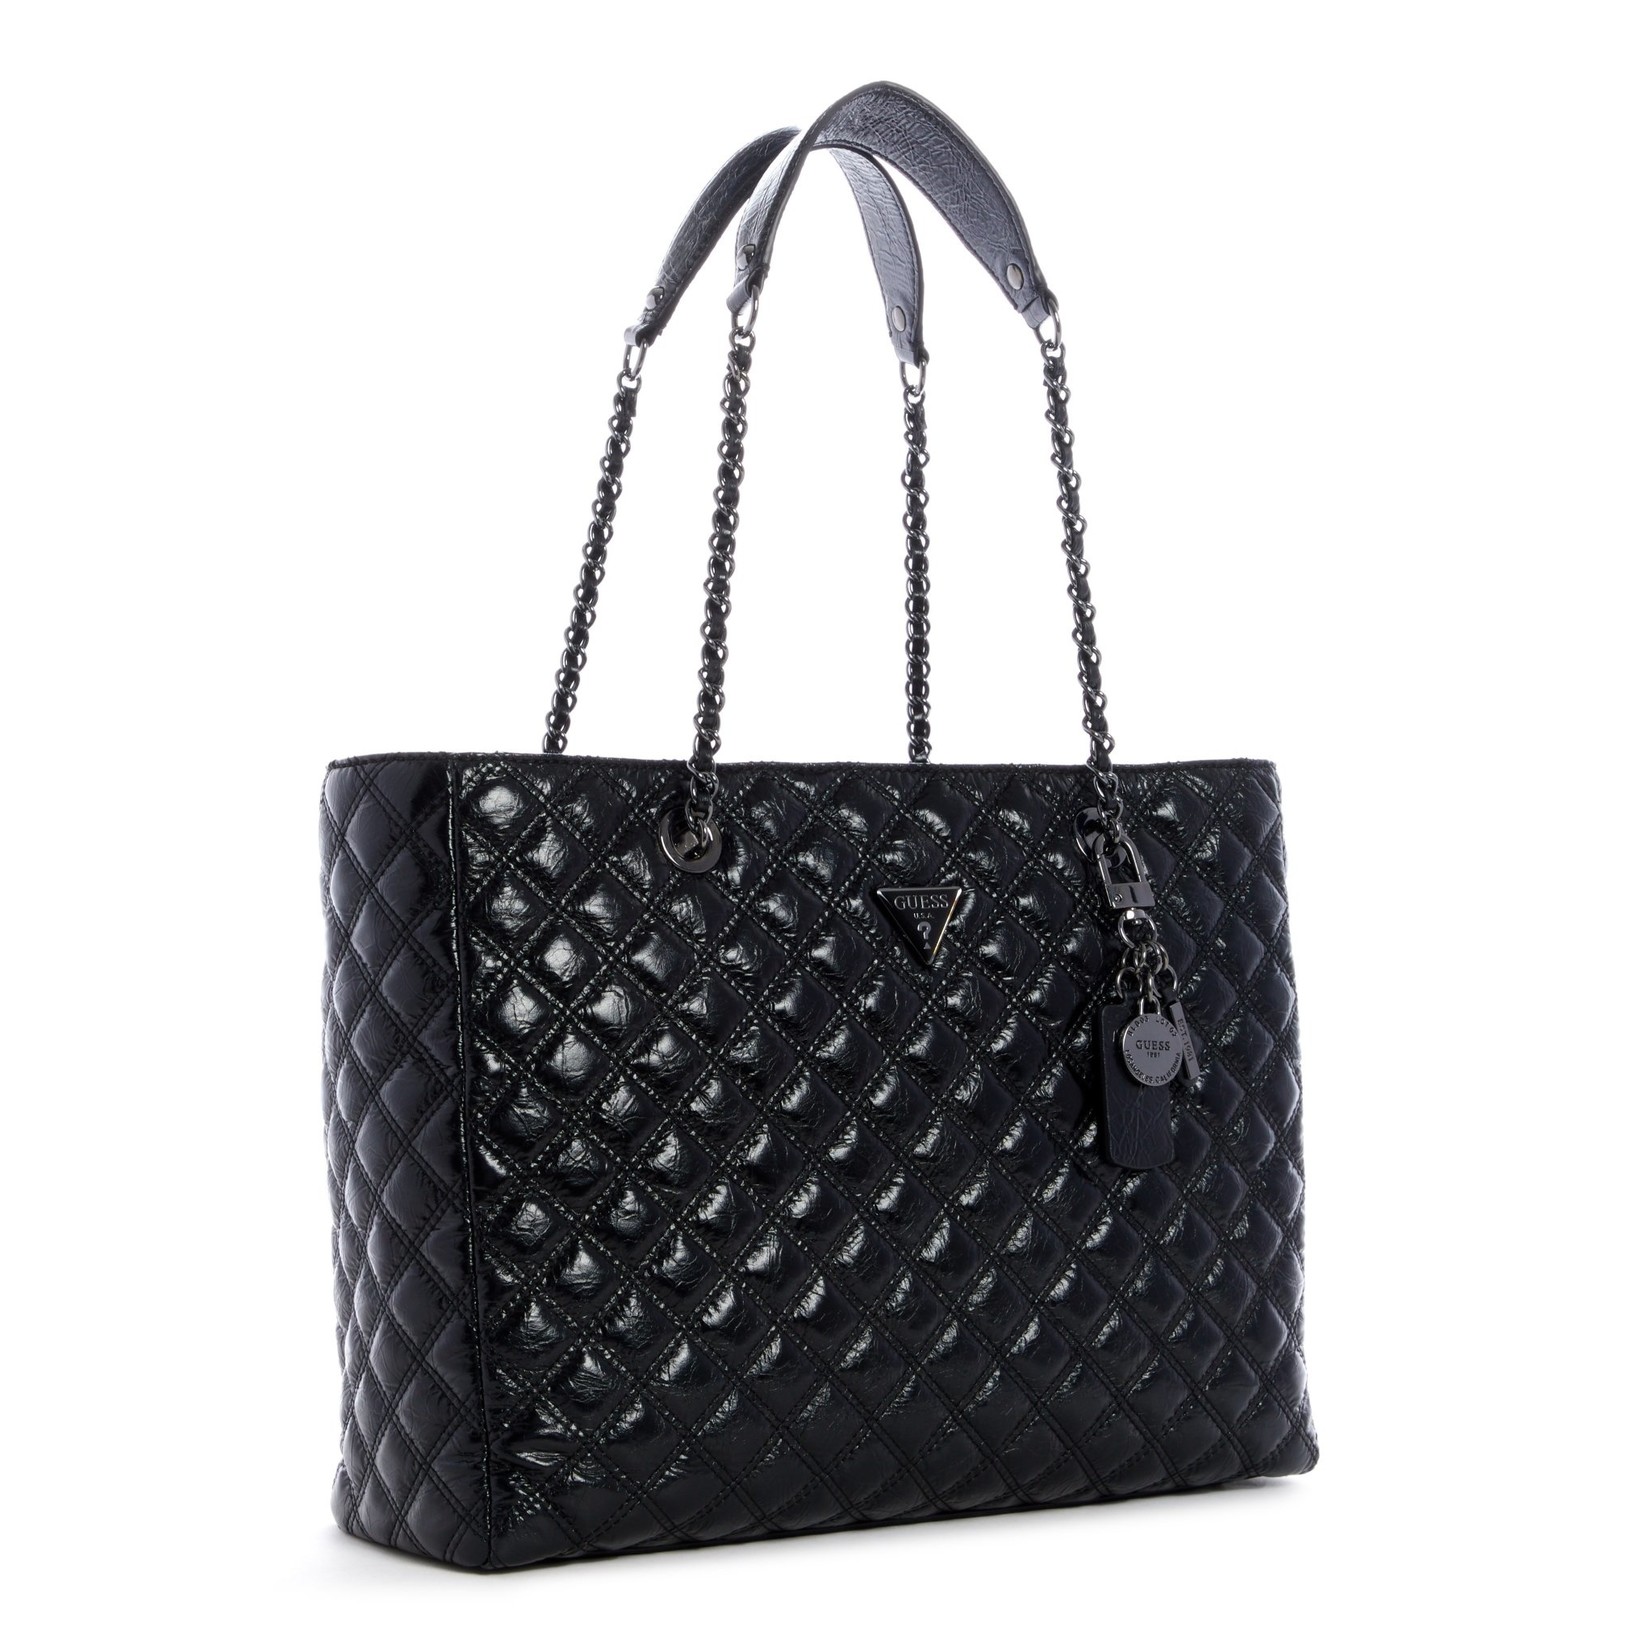 Guess Cessily Tote